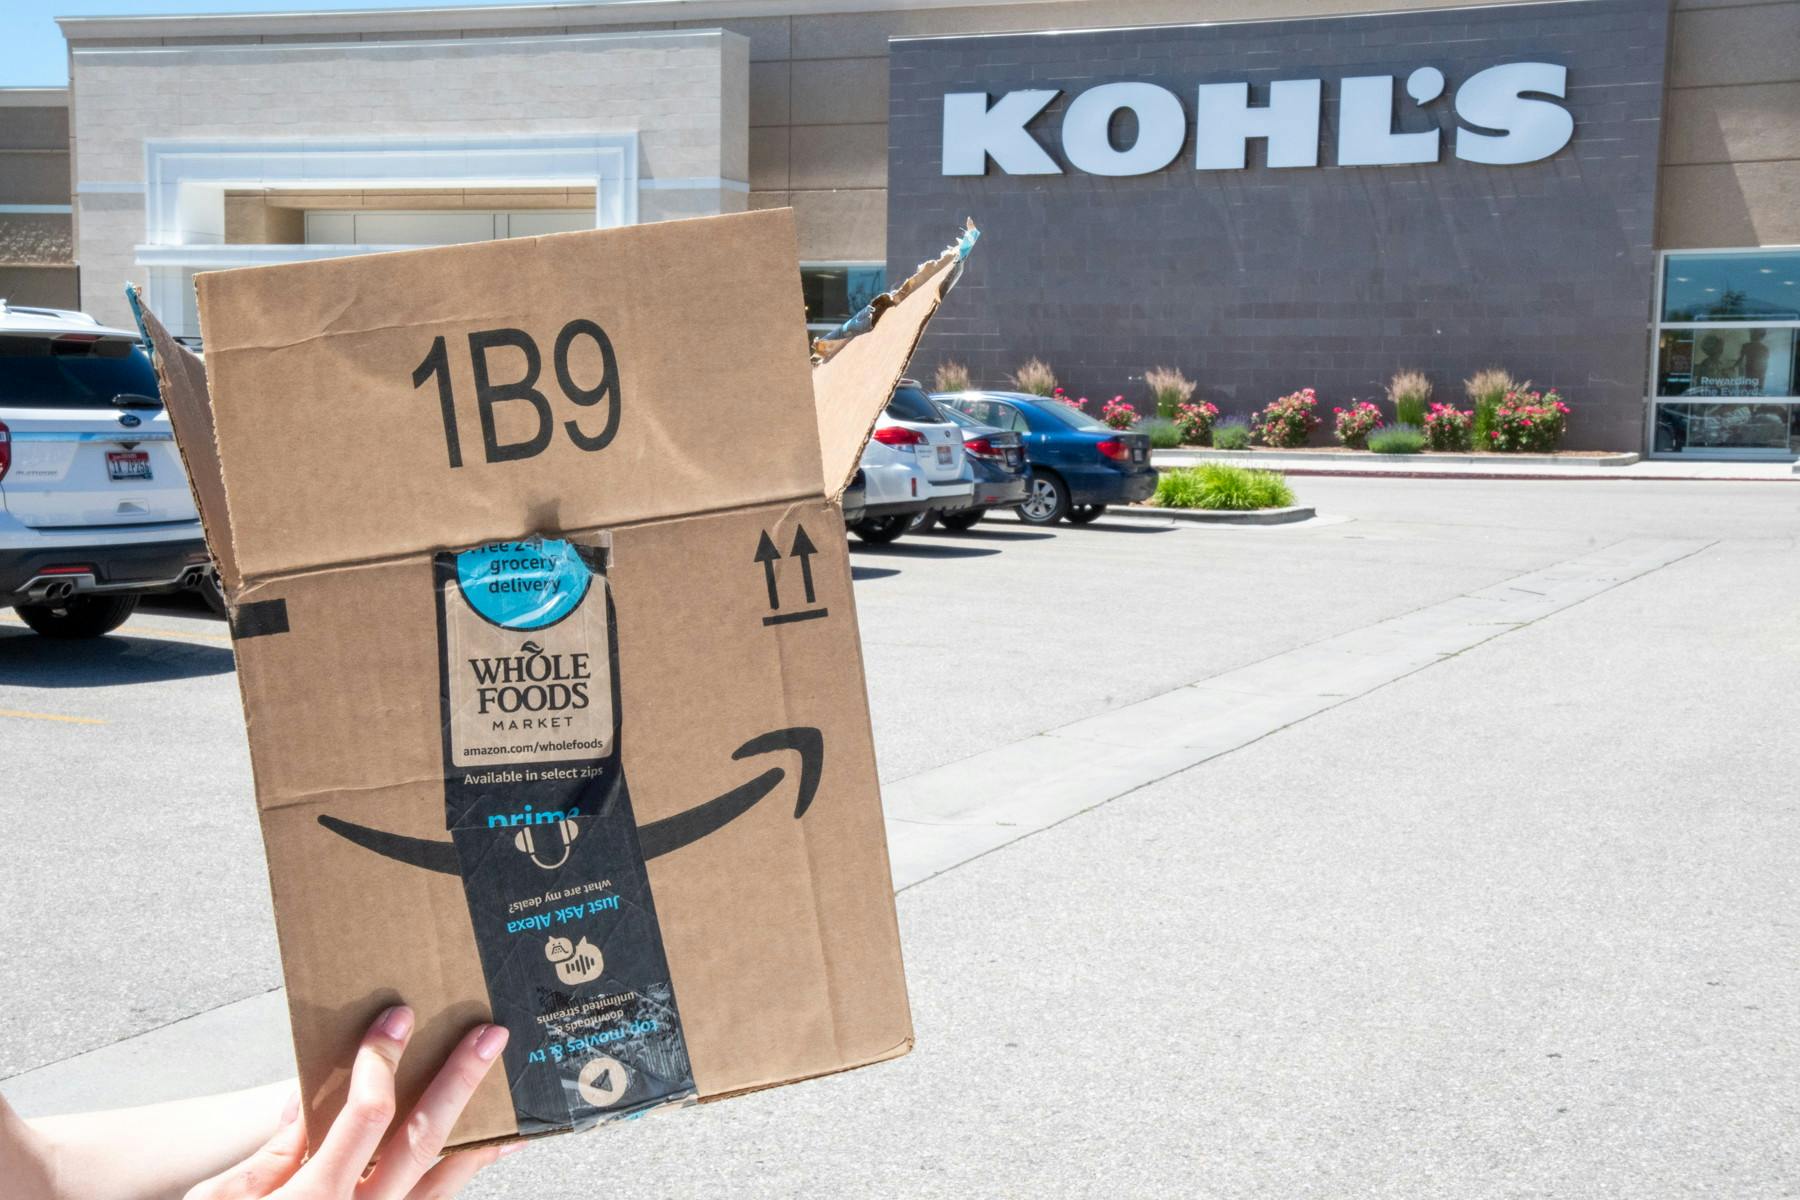 Kohl's  Returns: Hours, Coupons, and More - The Krazy Coupon Lady